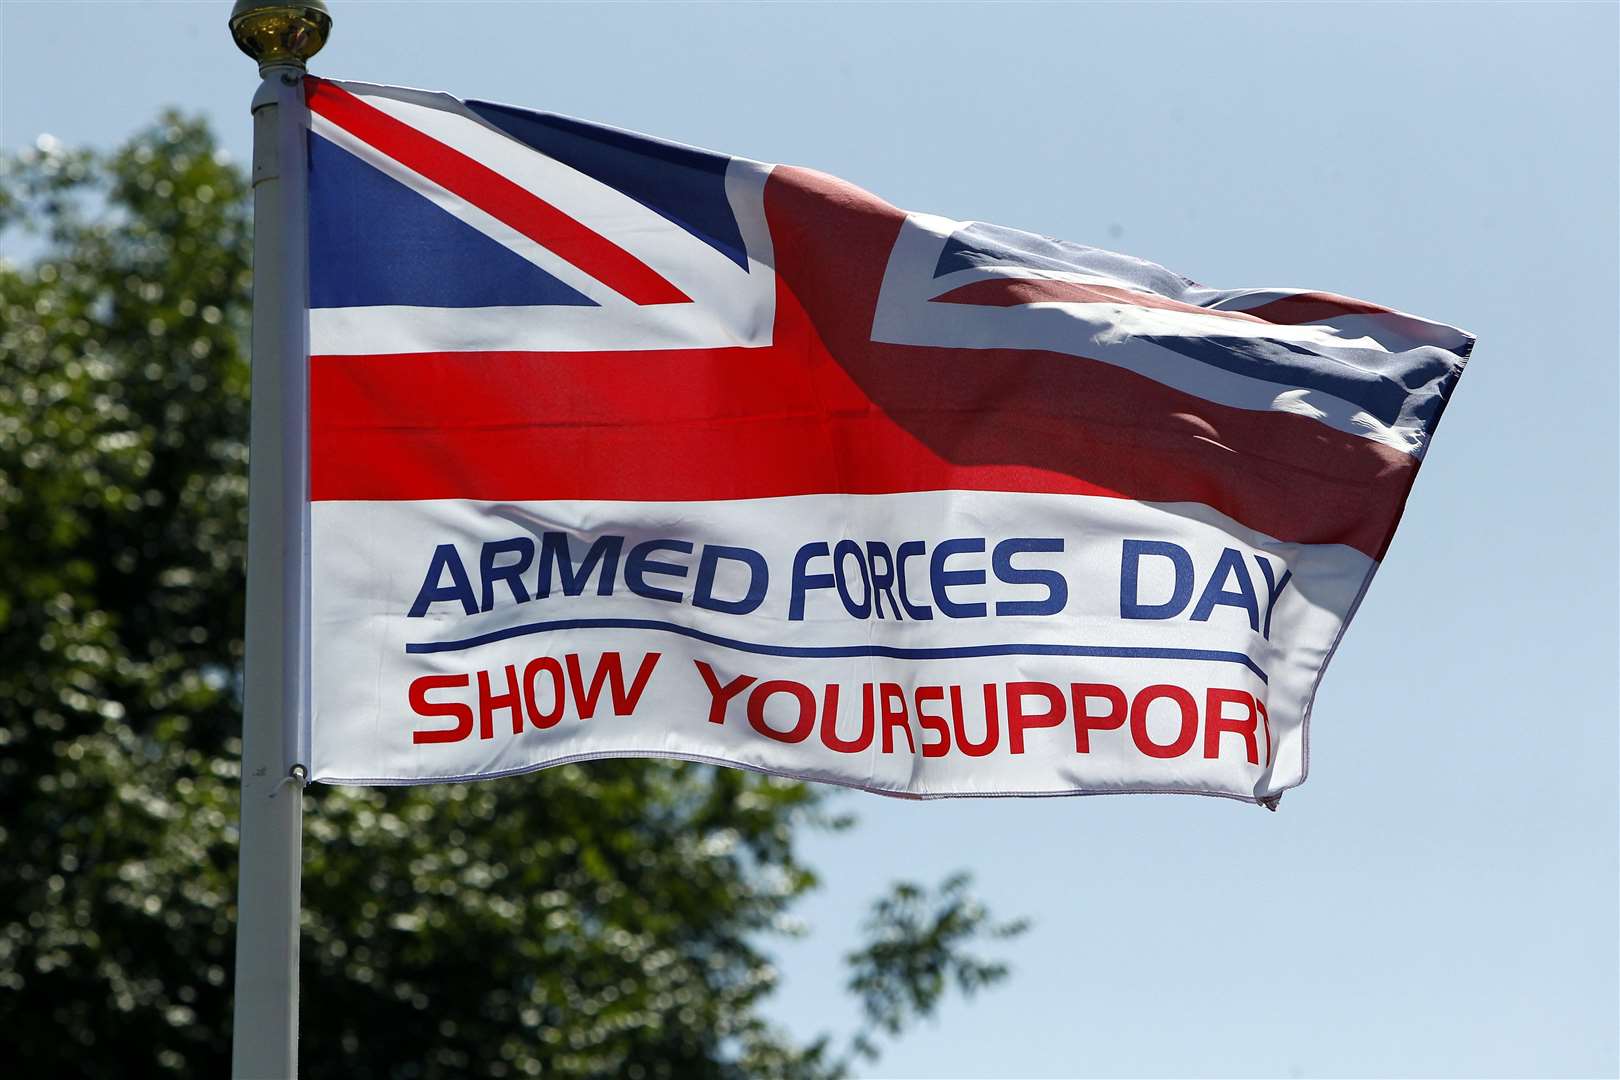 Armed Forces Day is on Saturday, June 29 this year